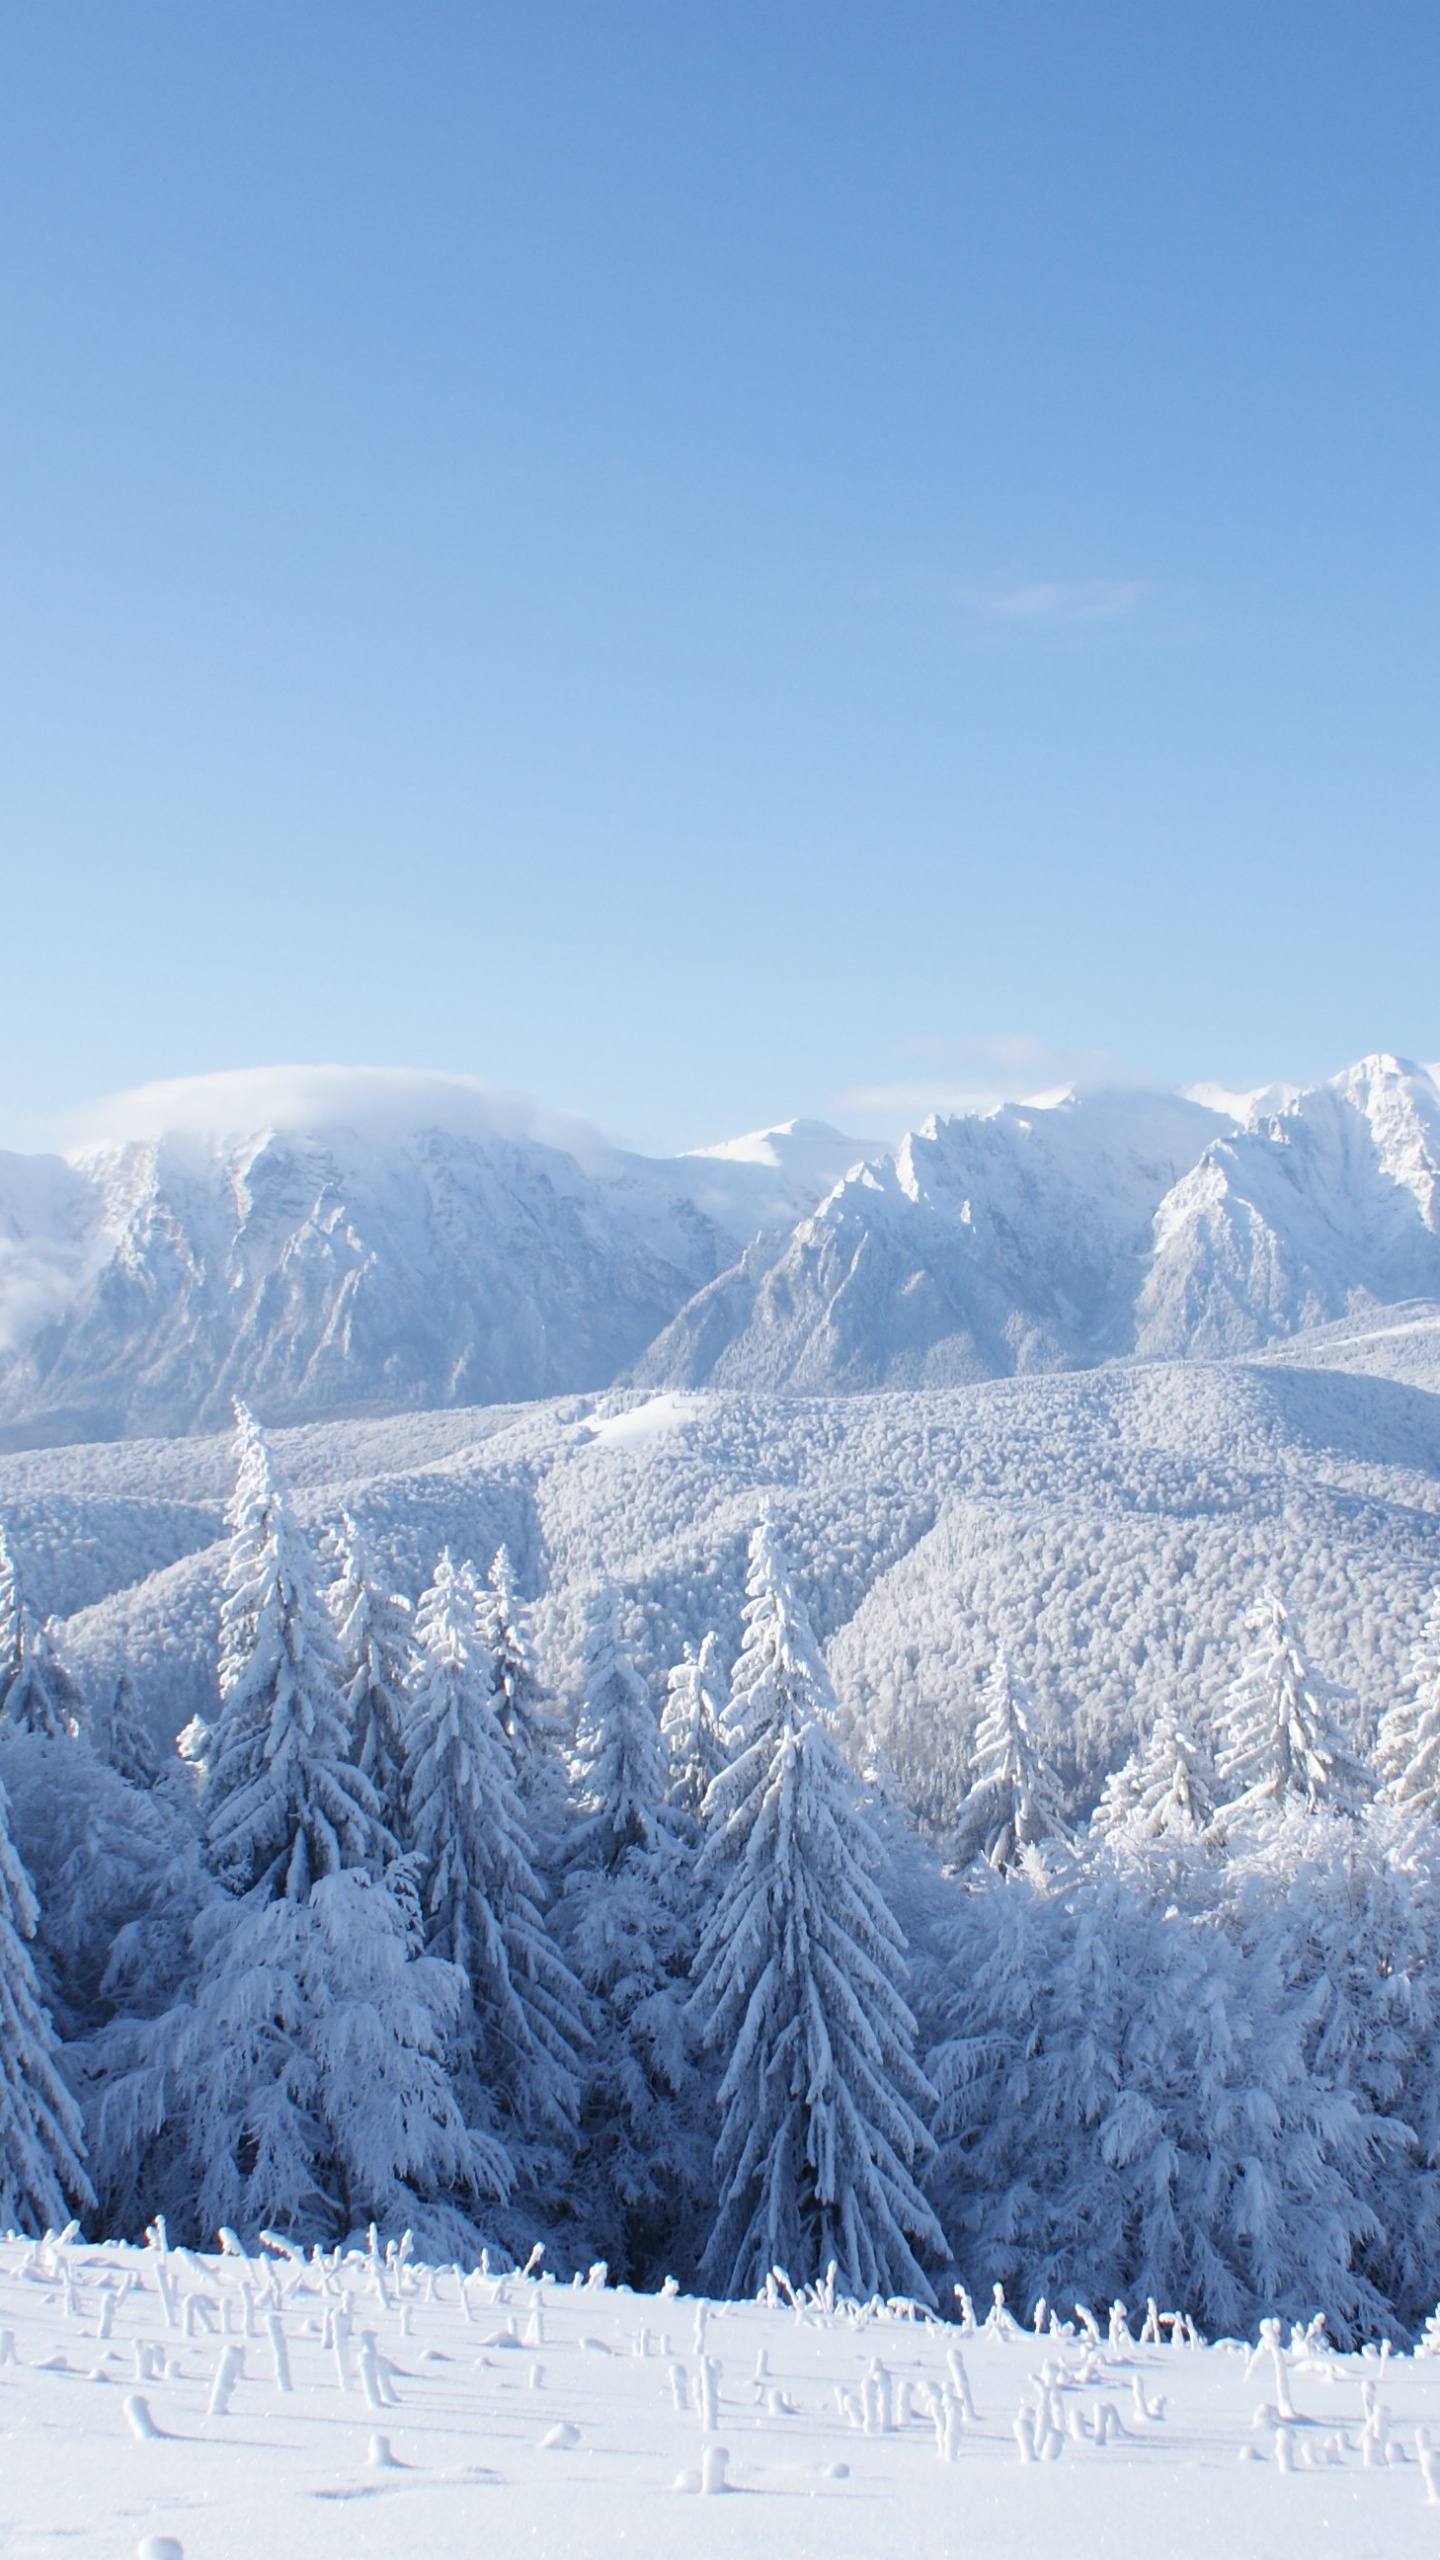 Snow Covered Pine Trees and Mountains During Daytime. Wallpaper in 1440x2560 Resolution